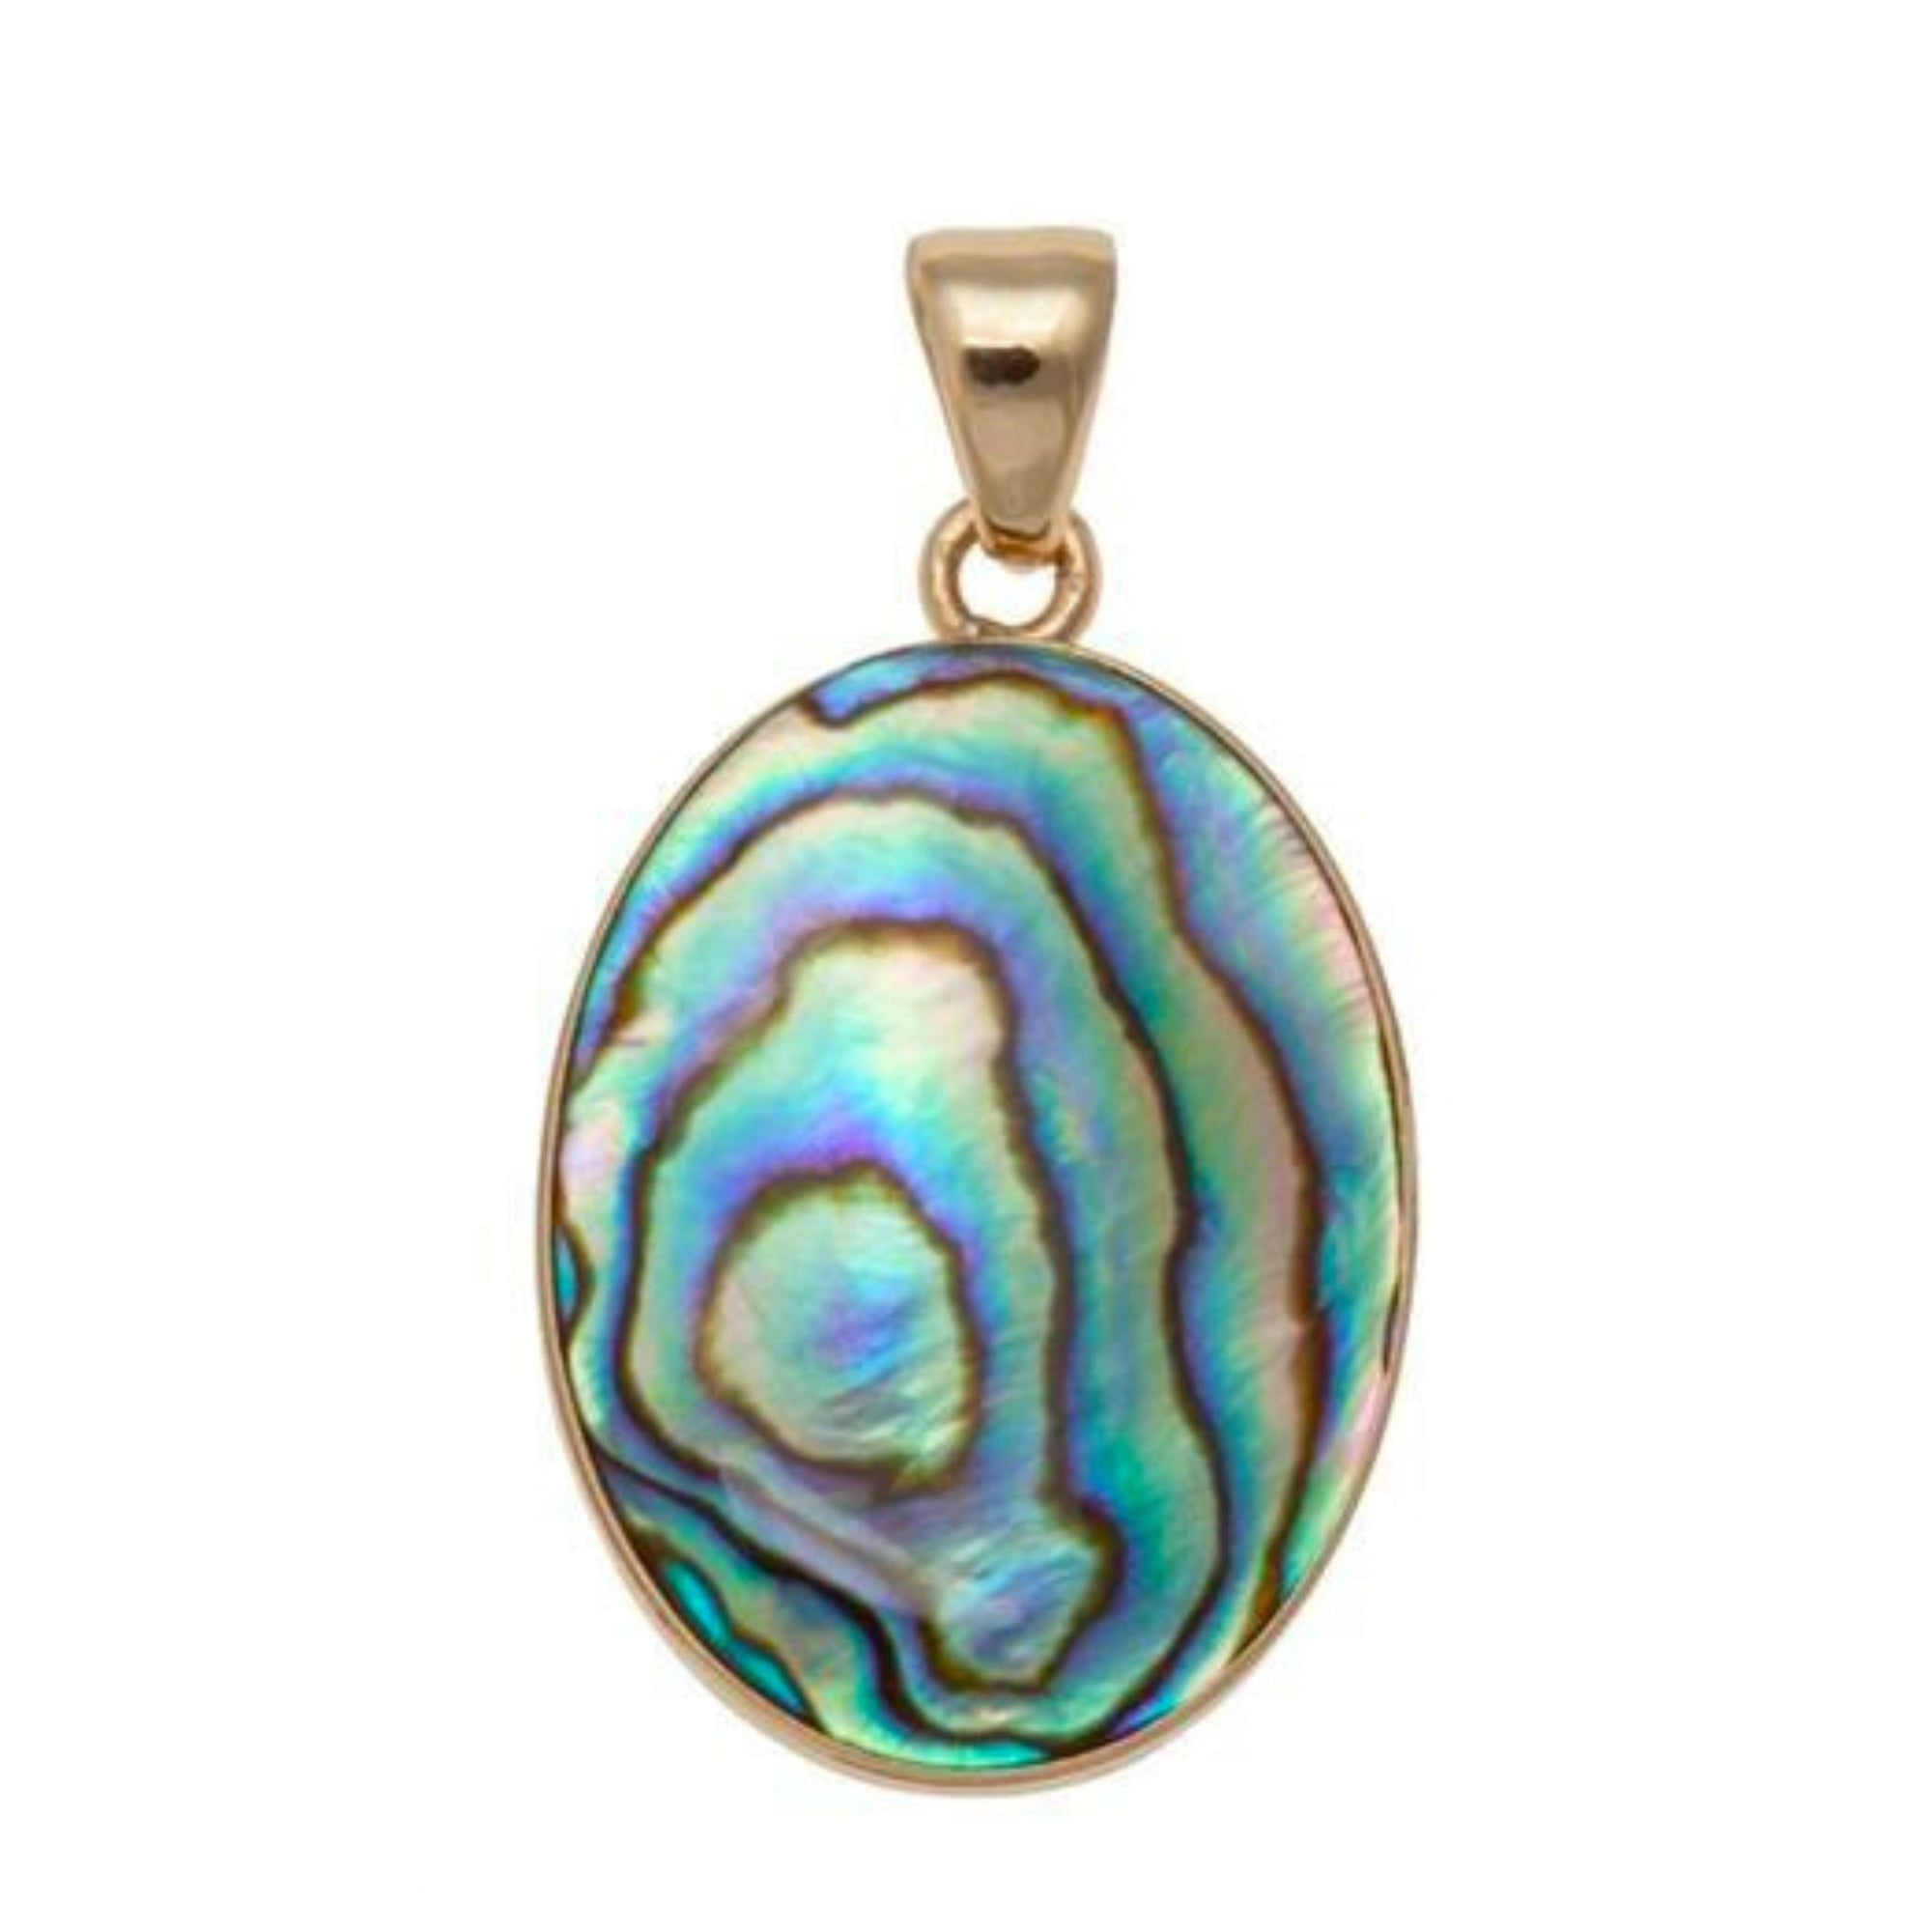 Charles Albert Jewelry - Alchemia Natural Abalone Pendant - Front View